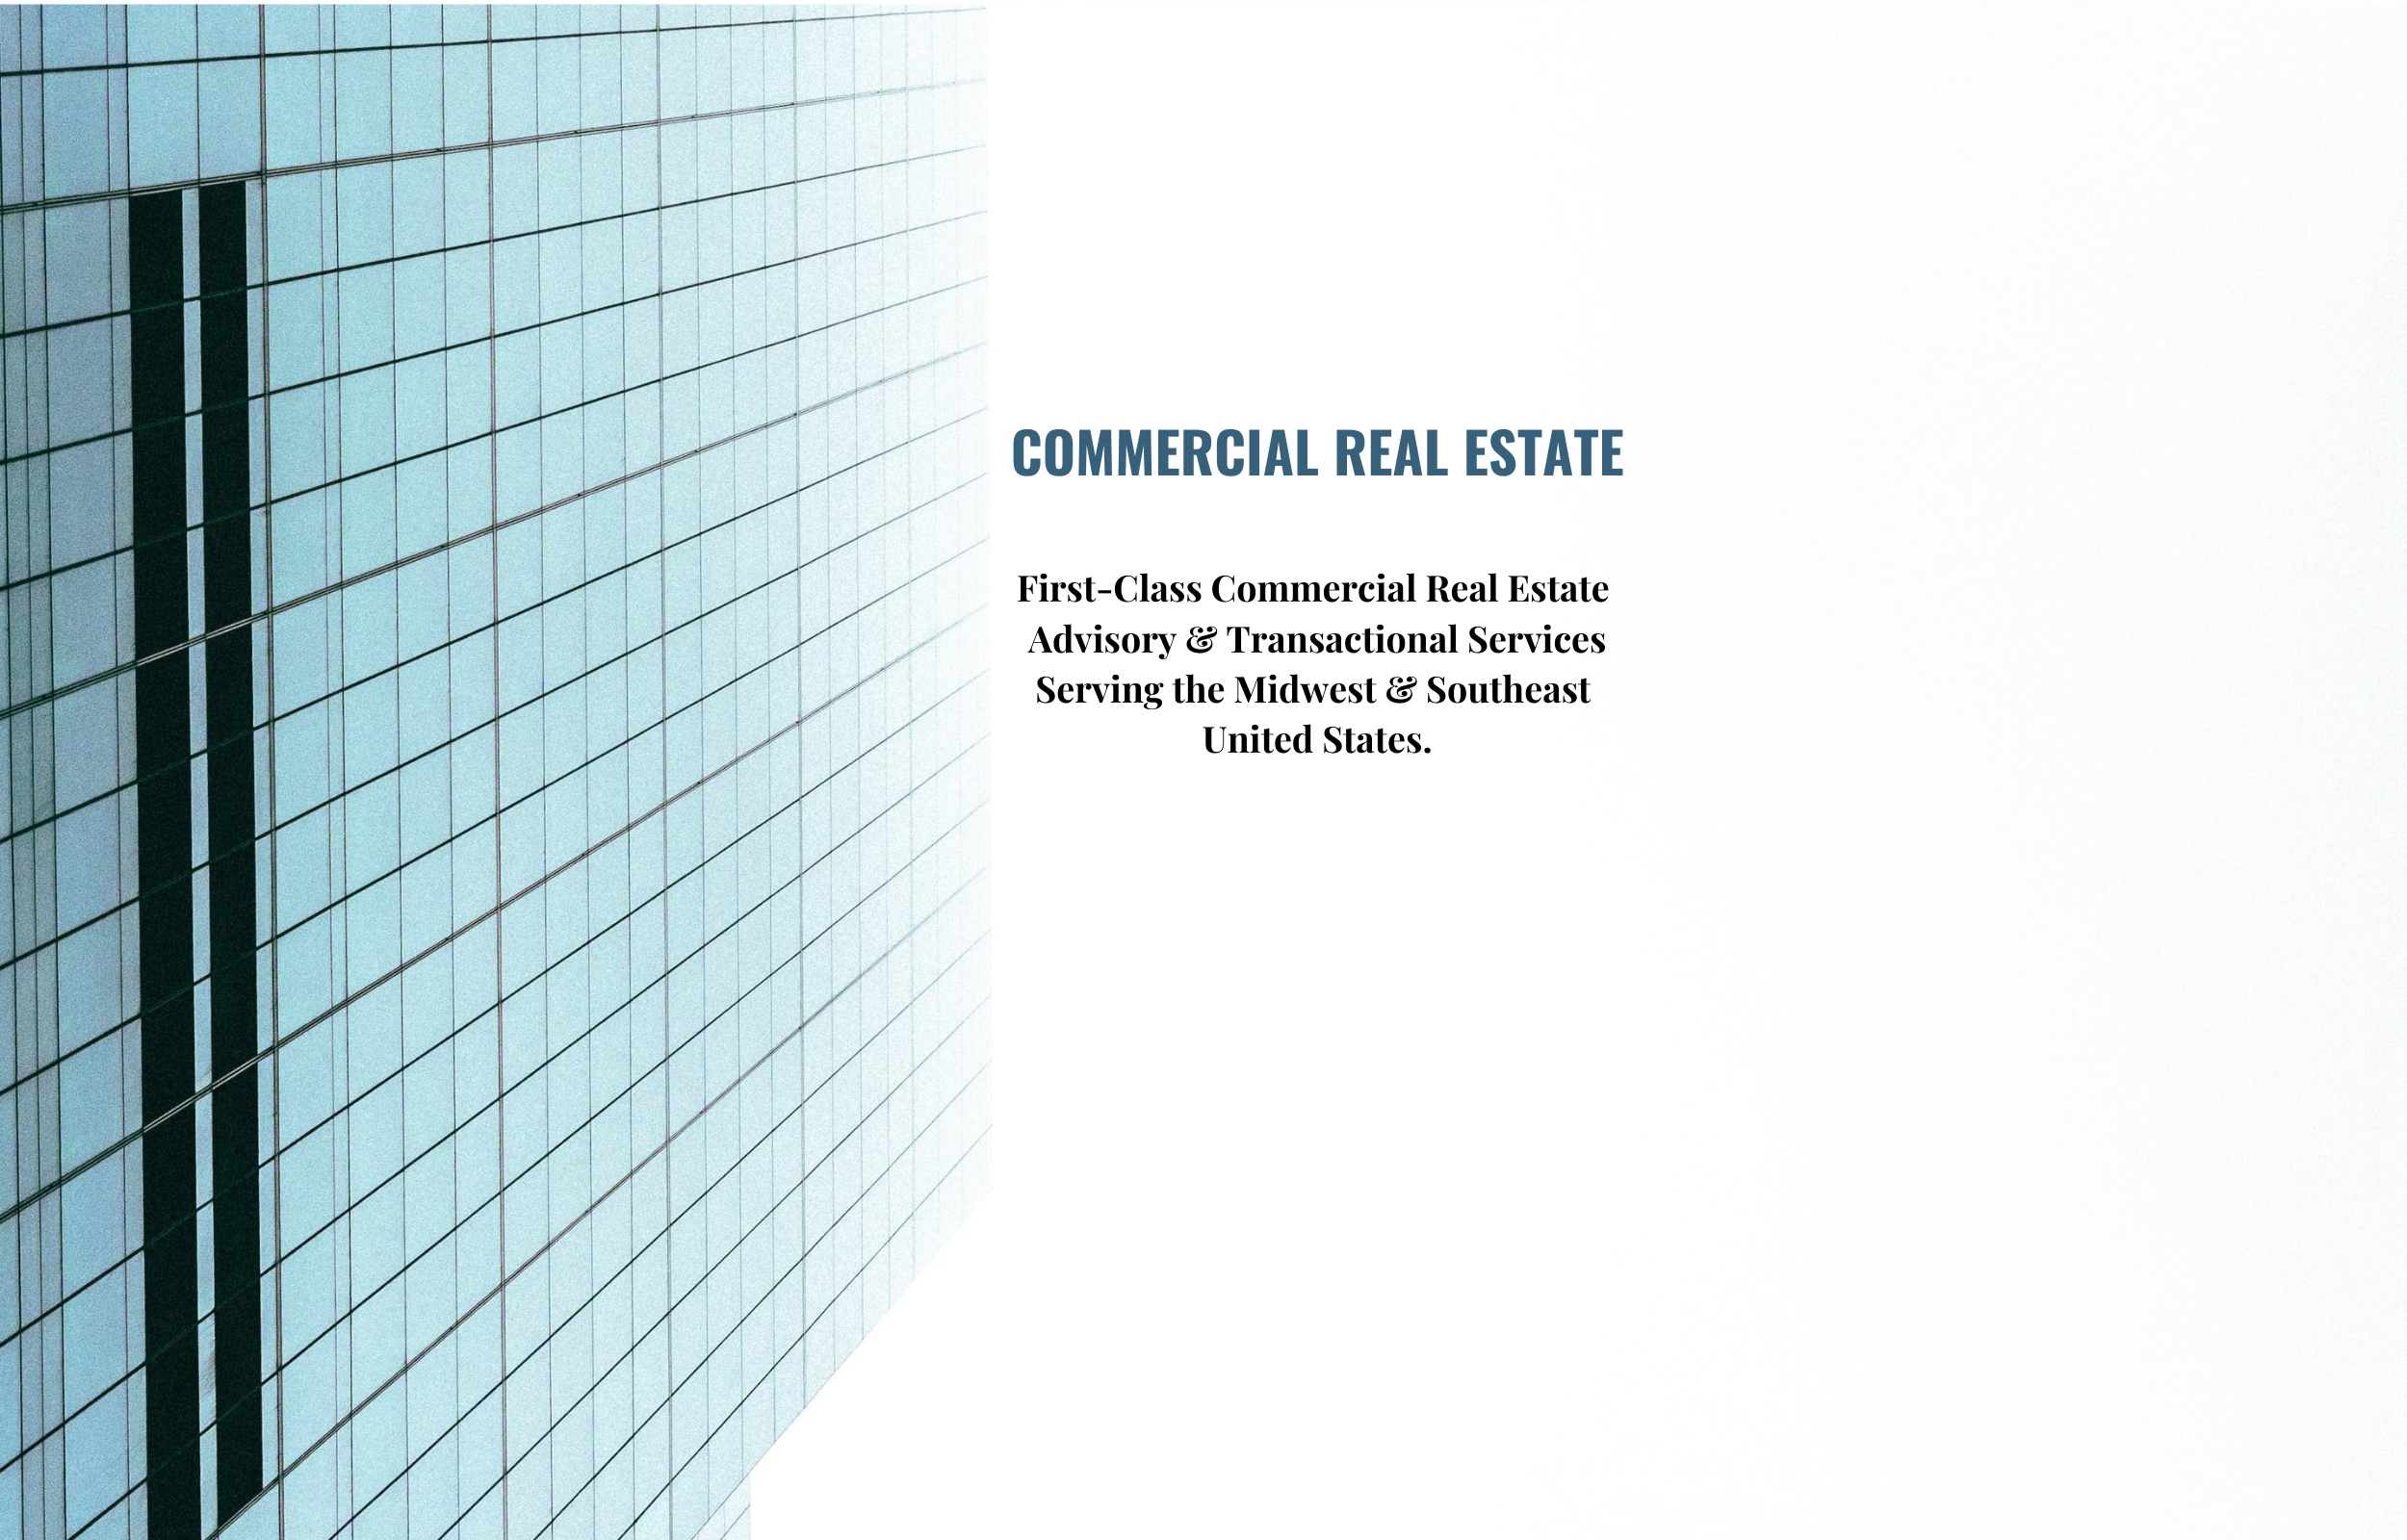 Real Estate & Energy Partners - World-class commercial real estate advisory